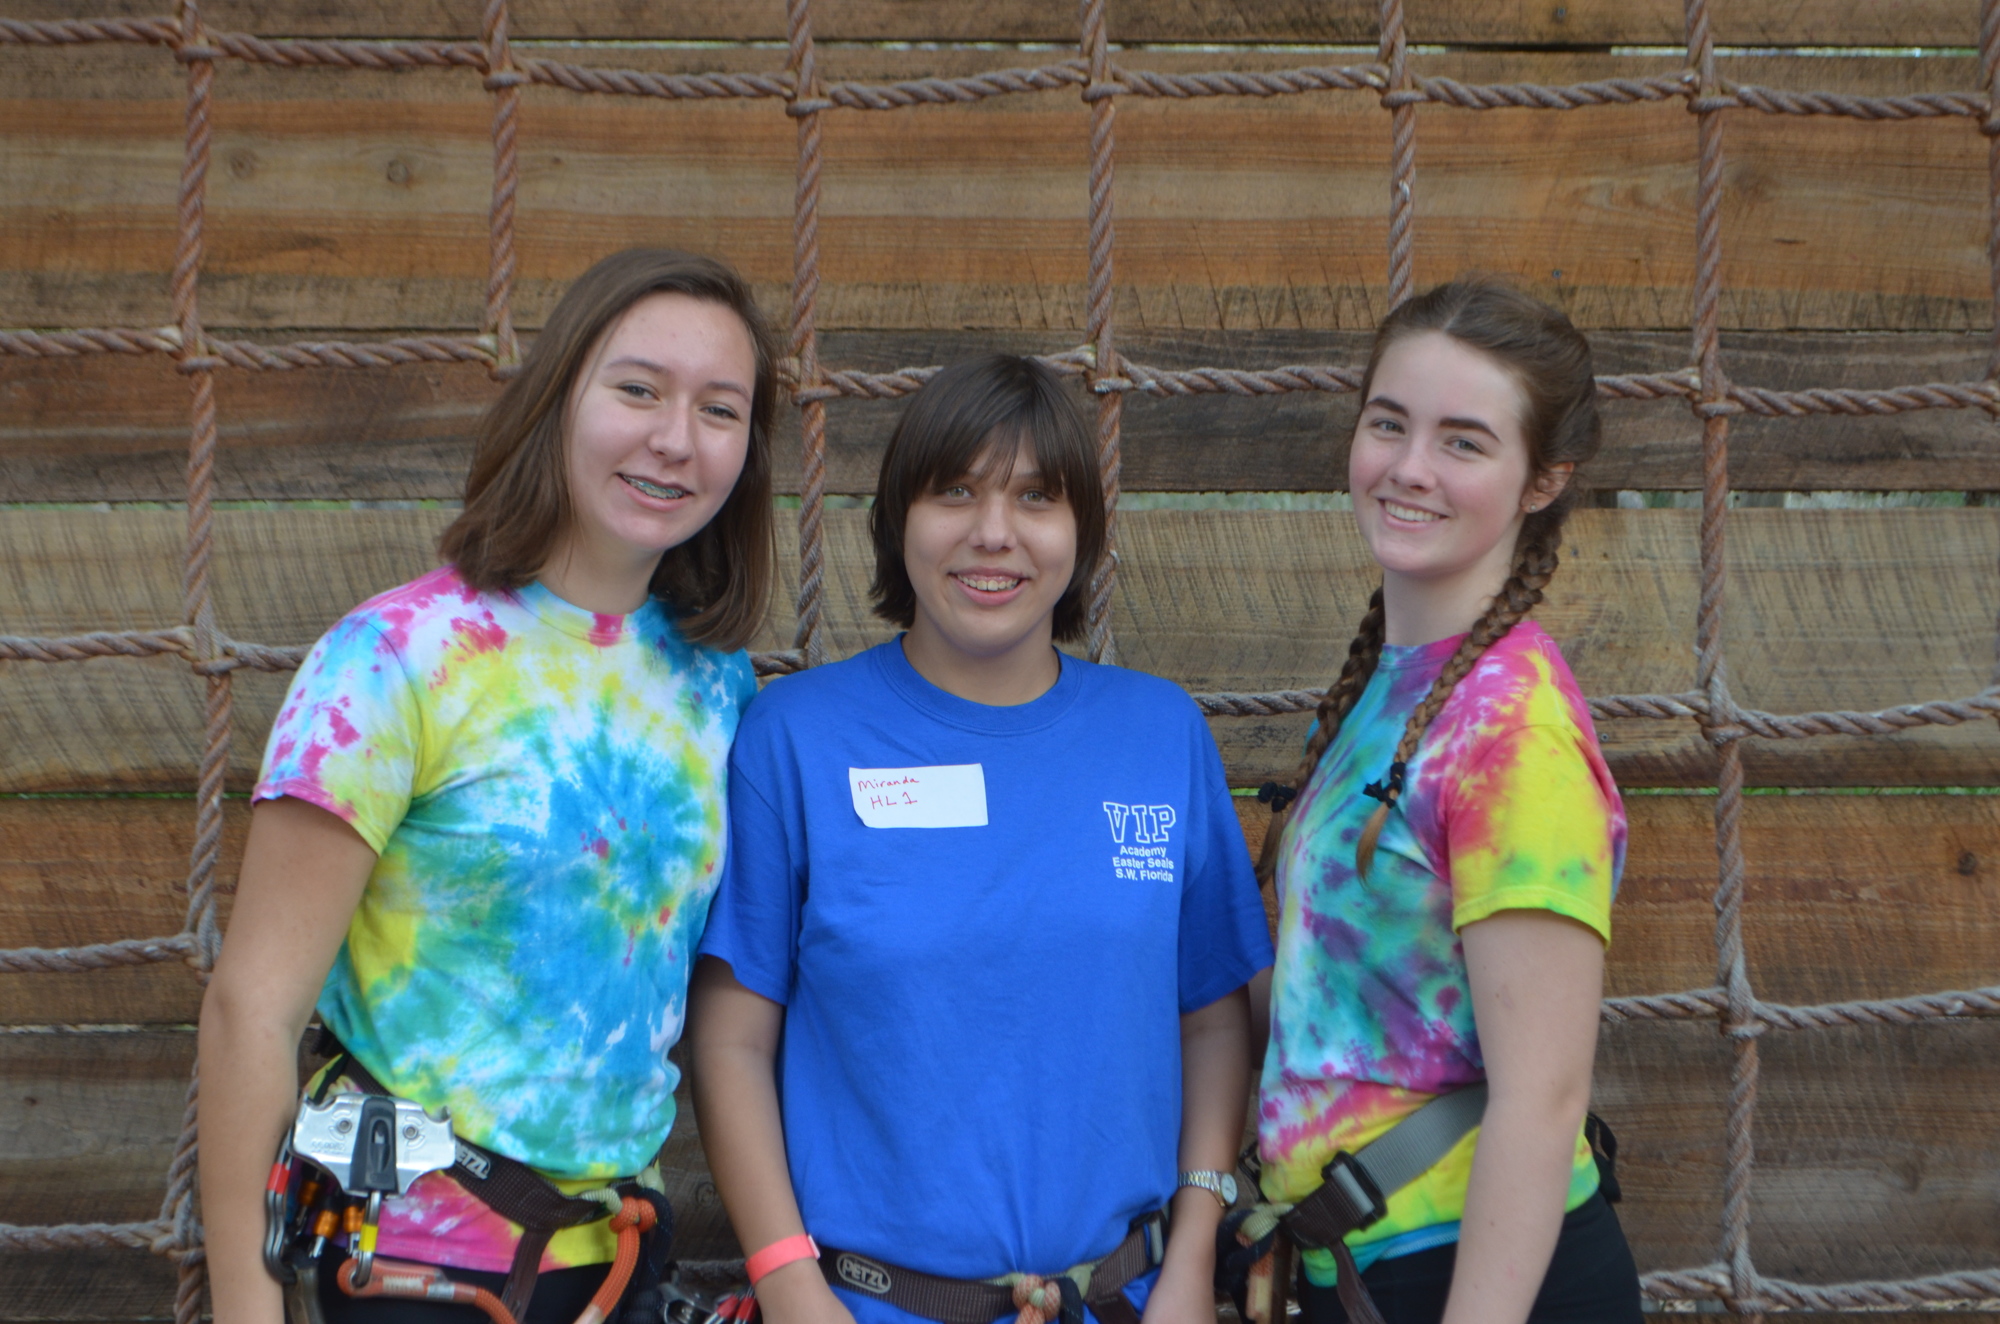 Maria Miller, an ODA sophomore, Miranda Newland, 18, and Alex Assha, an ODA sophomore, were buddies during an outing at the TreeUmph! Adventure Course.